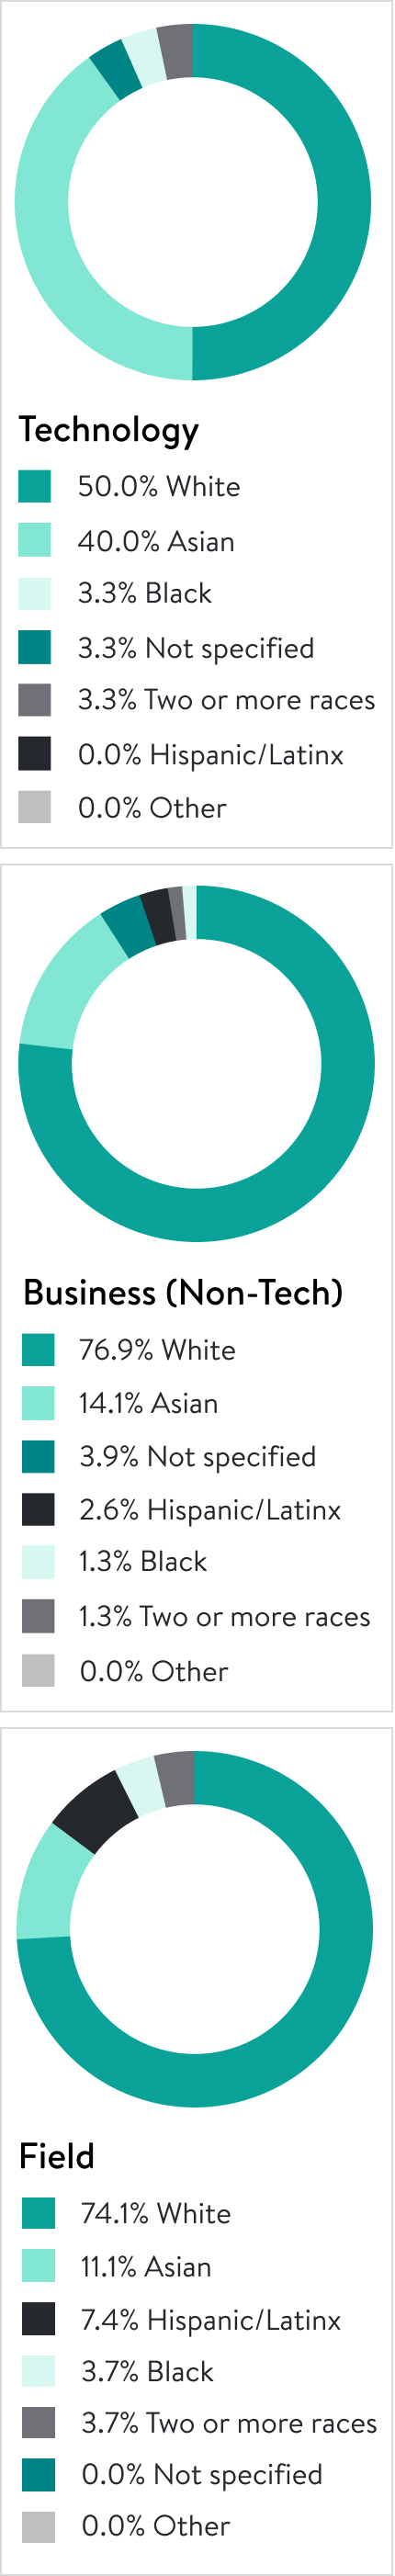 Three pie charts, displaying Leadership Racial/Ethnic Representation in Technology, Business (non-Tech), and Field Departments.